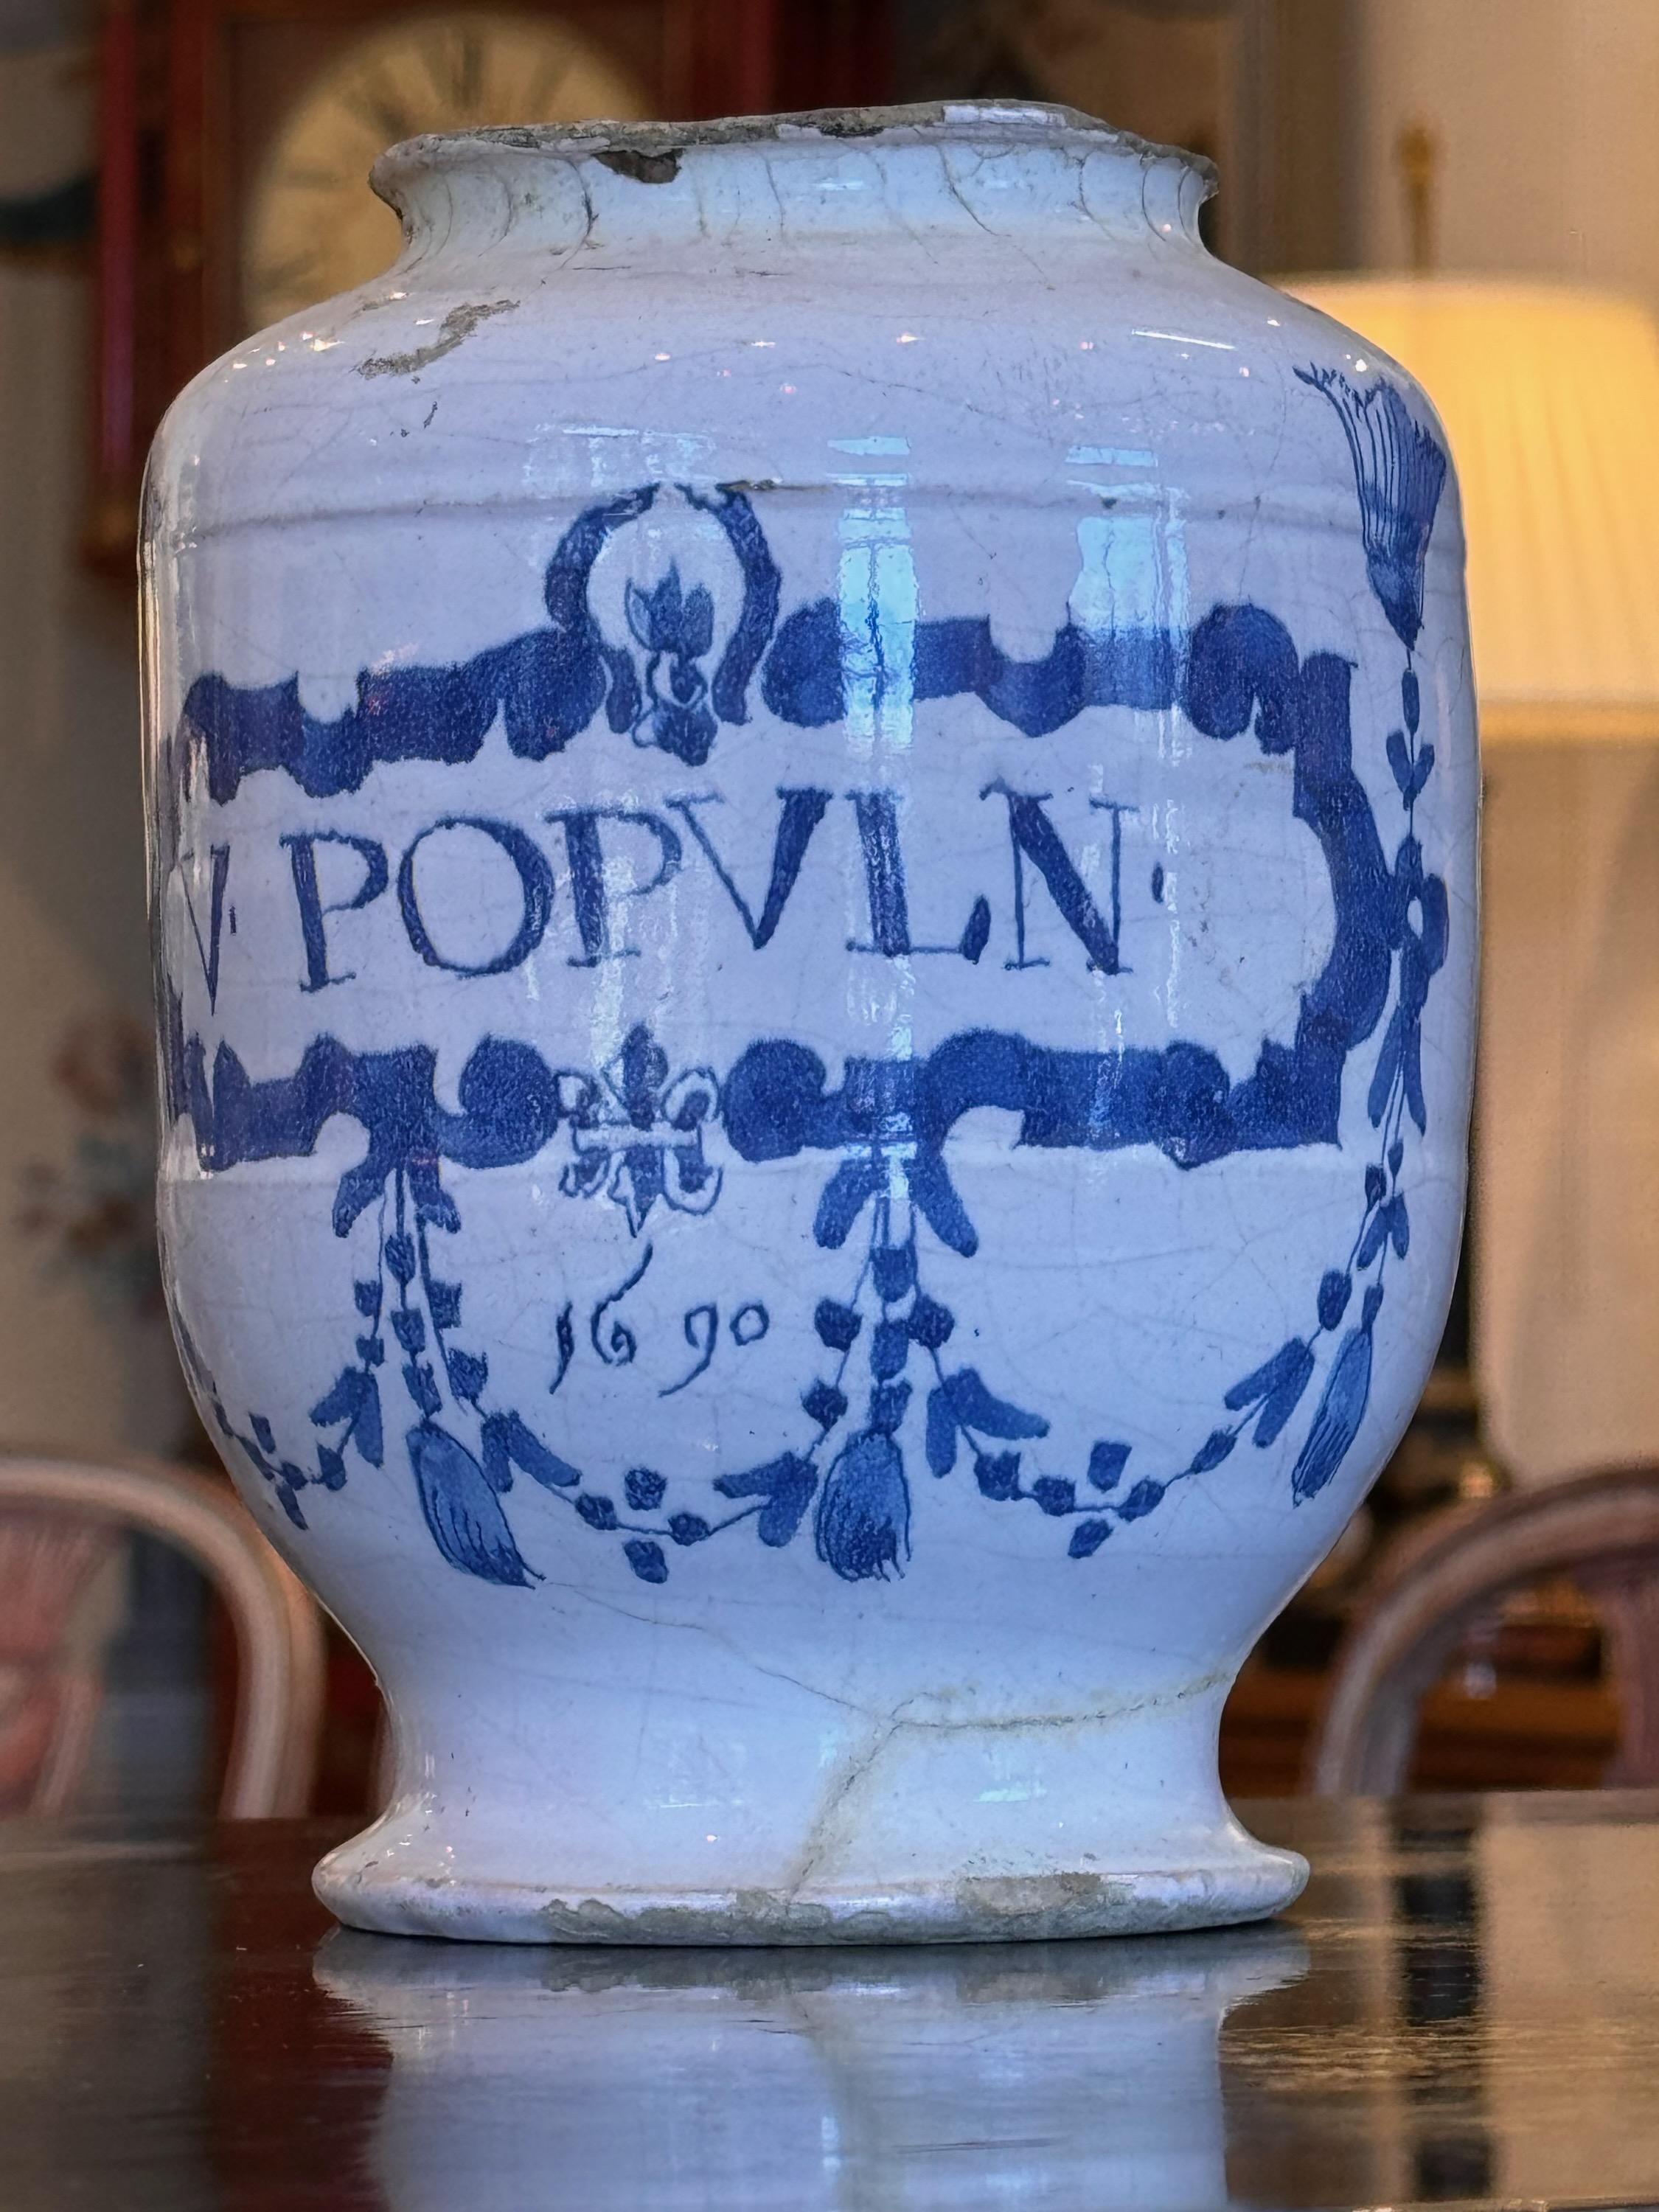 A nice example of an early drug jar. Great decoration.